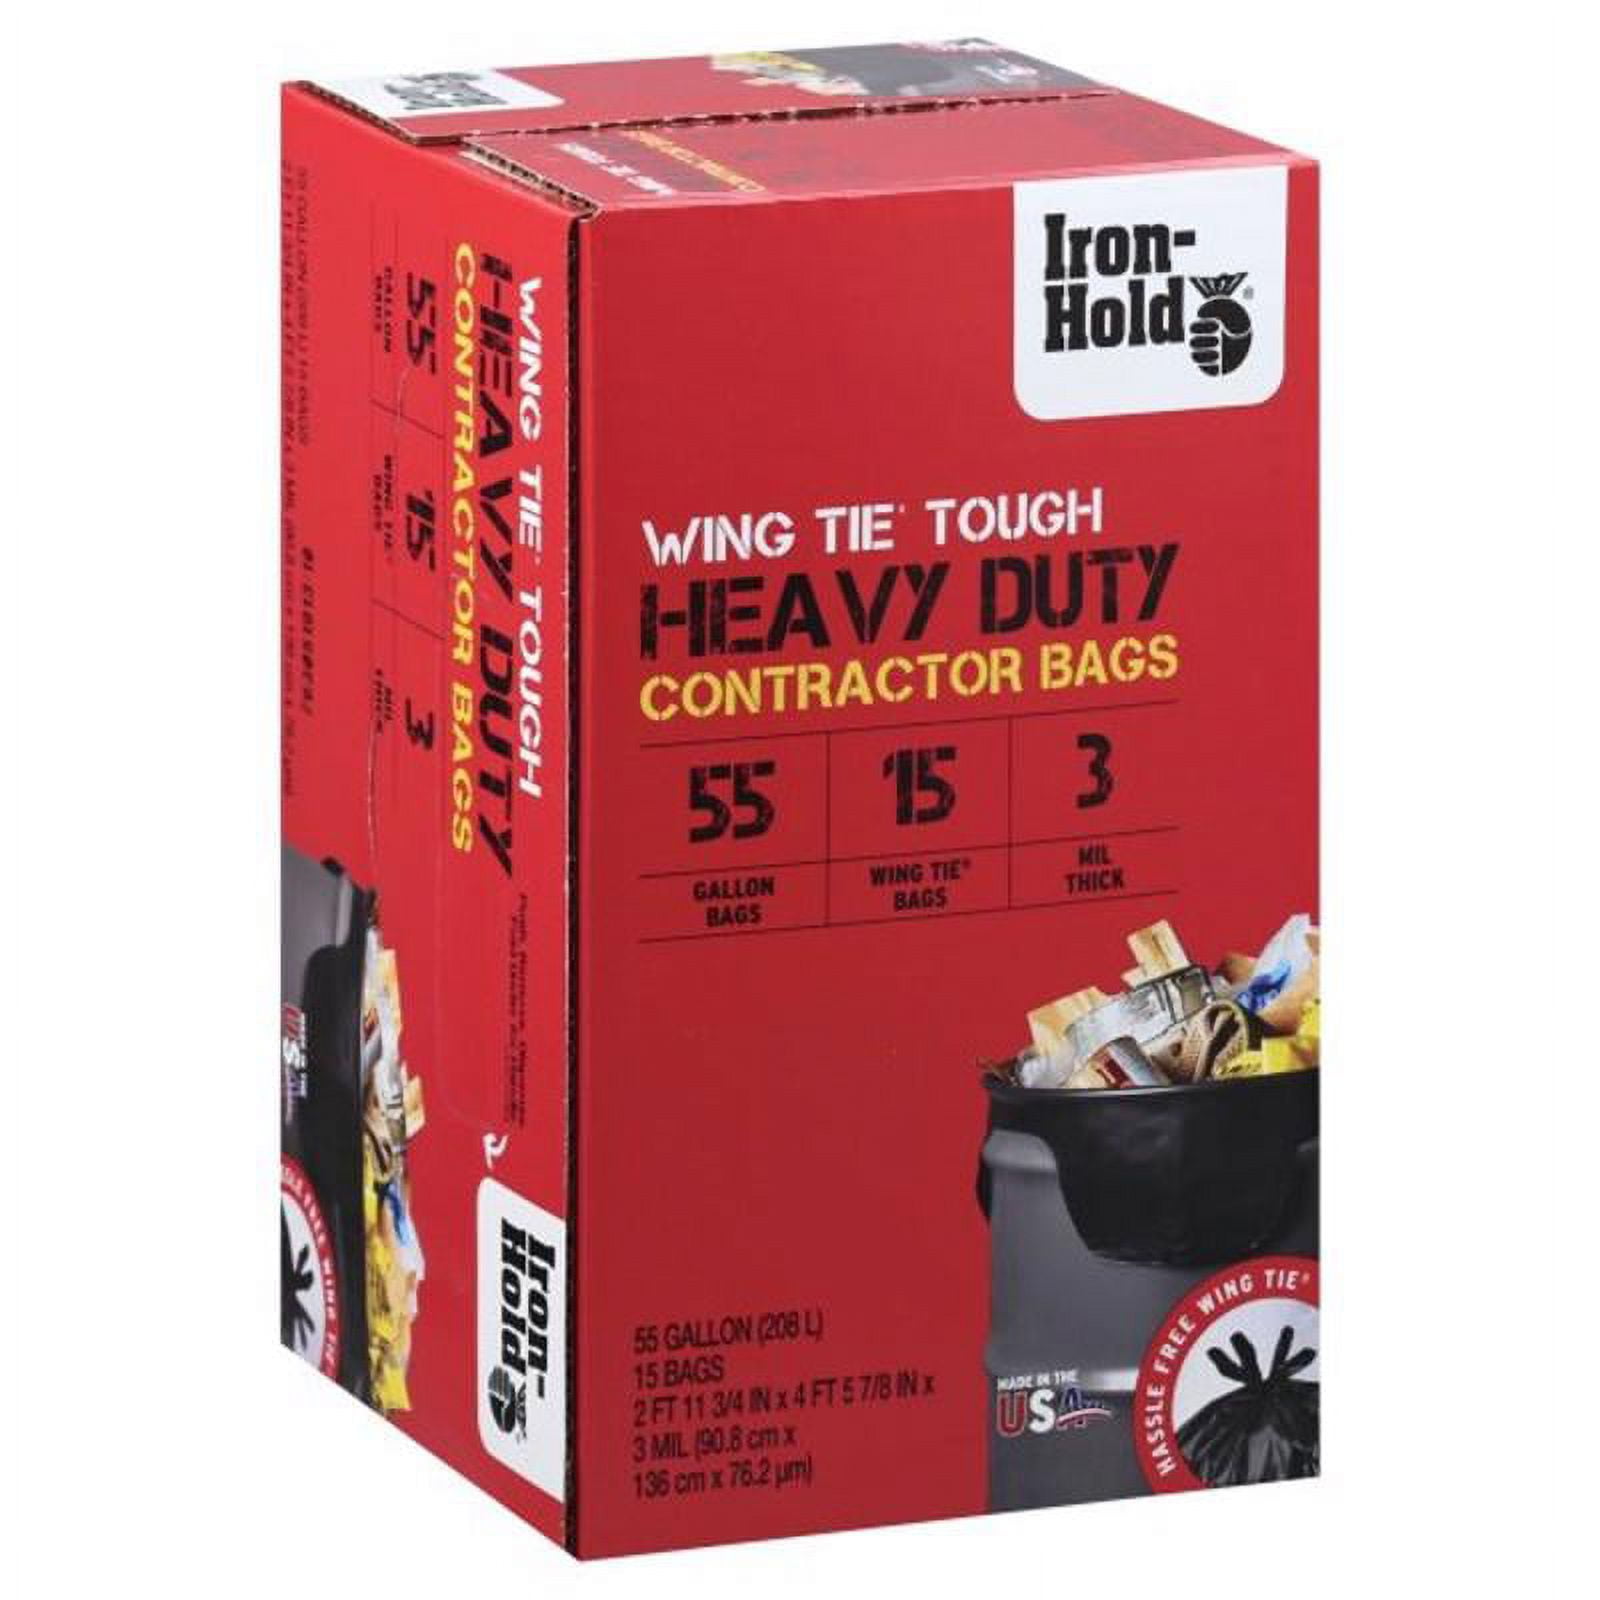 Iron Hold 55 Gal. Trash Bags Includes Twist ties (40 Count)